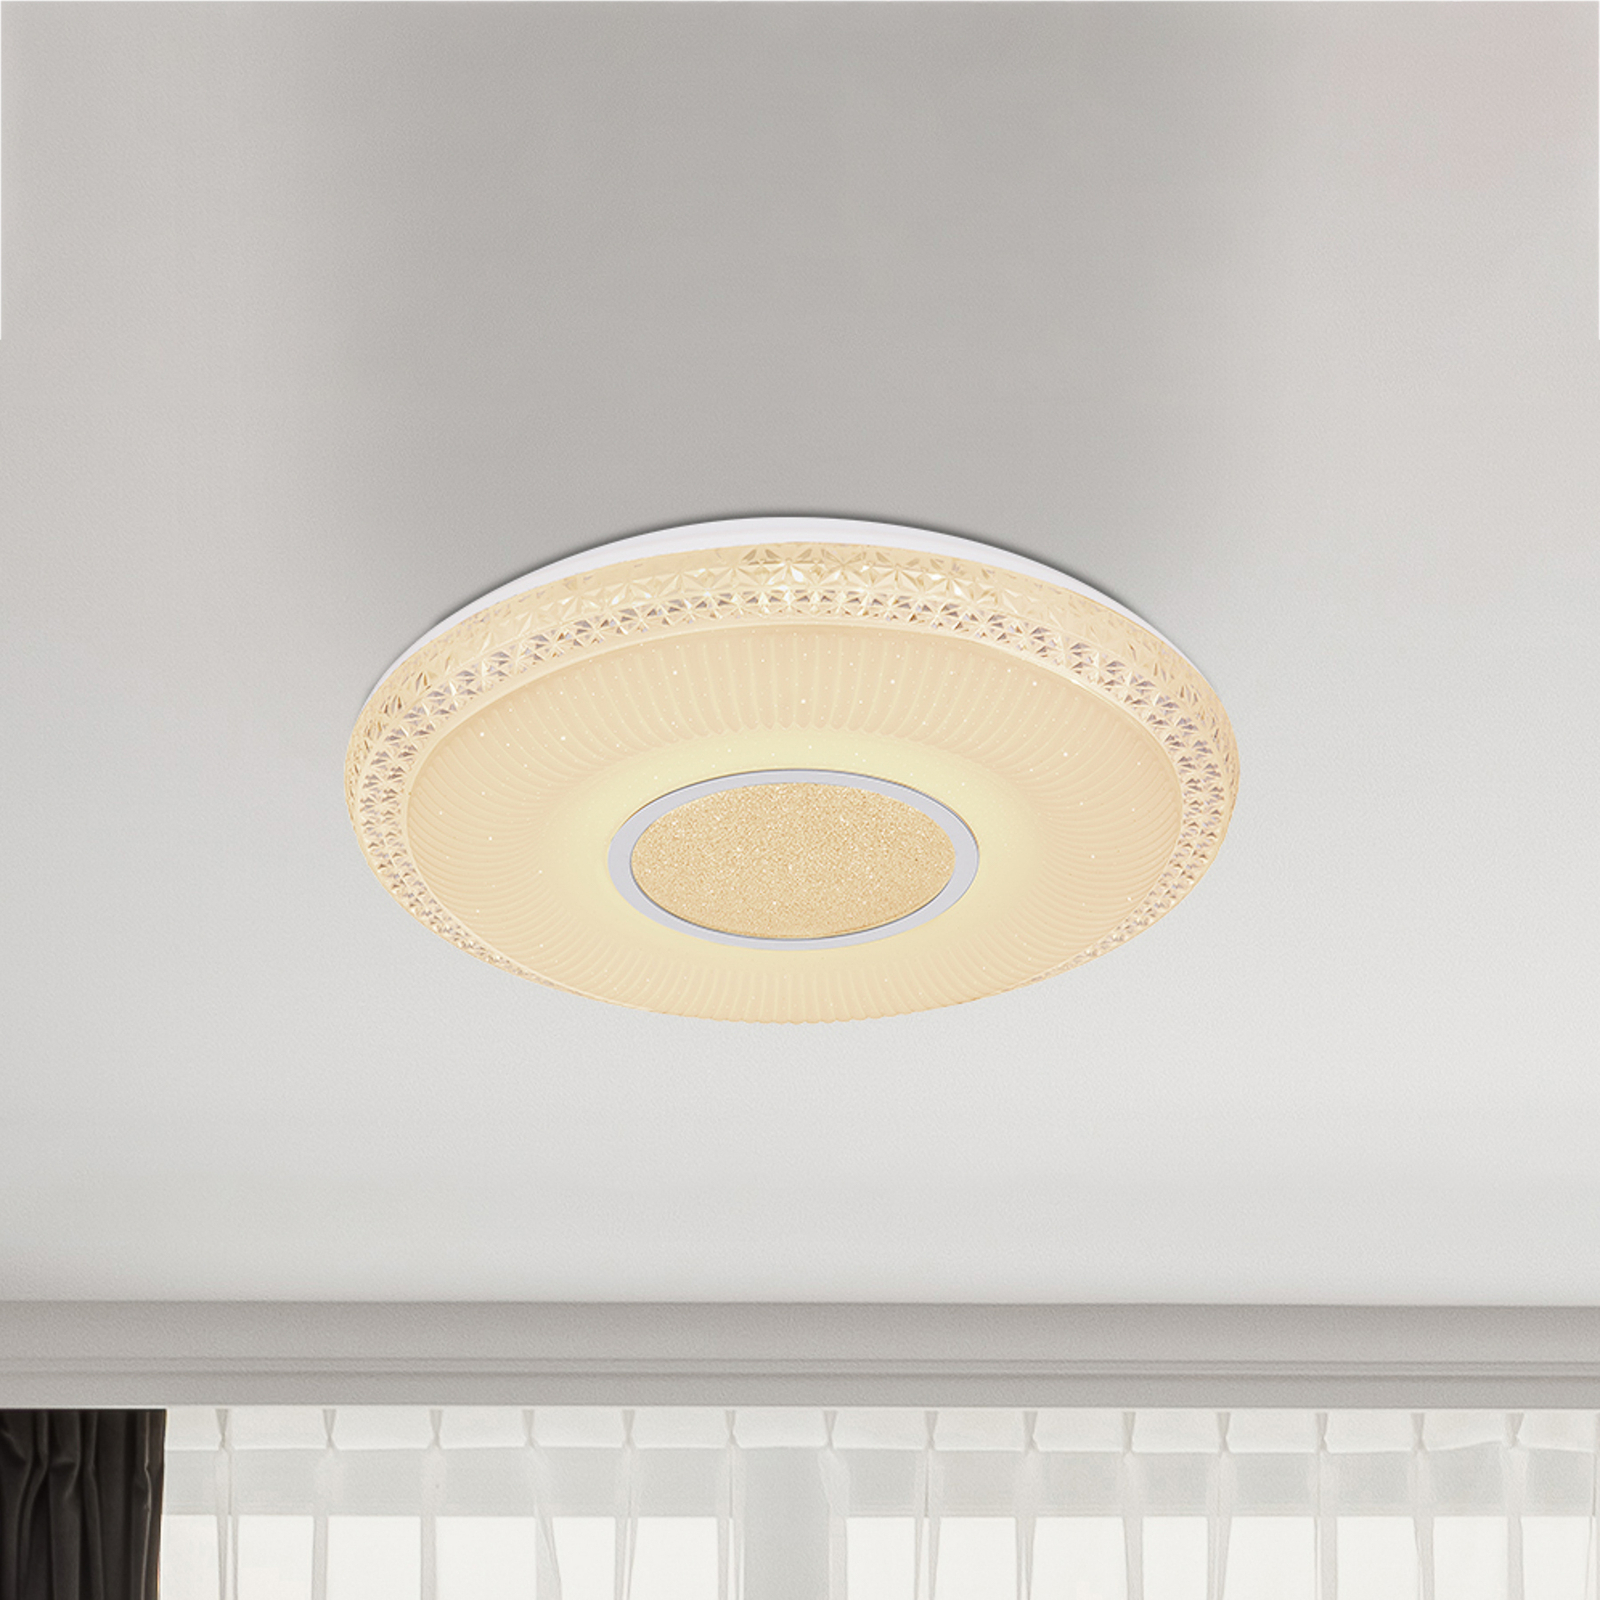 Klemens LED ceiling light, round, dimmable, RGBW